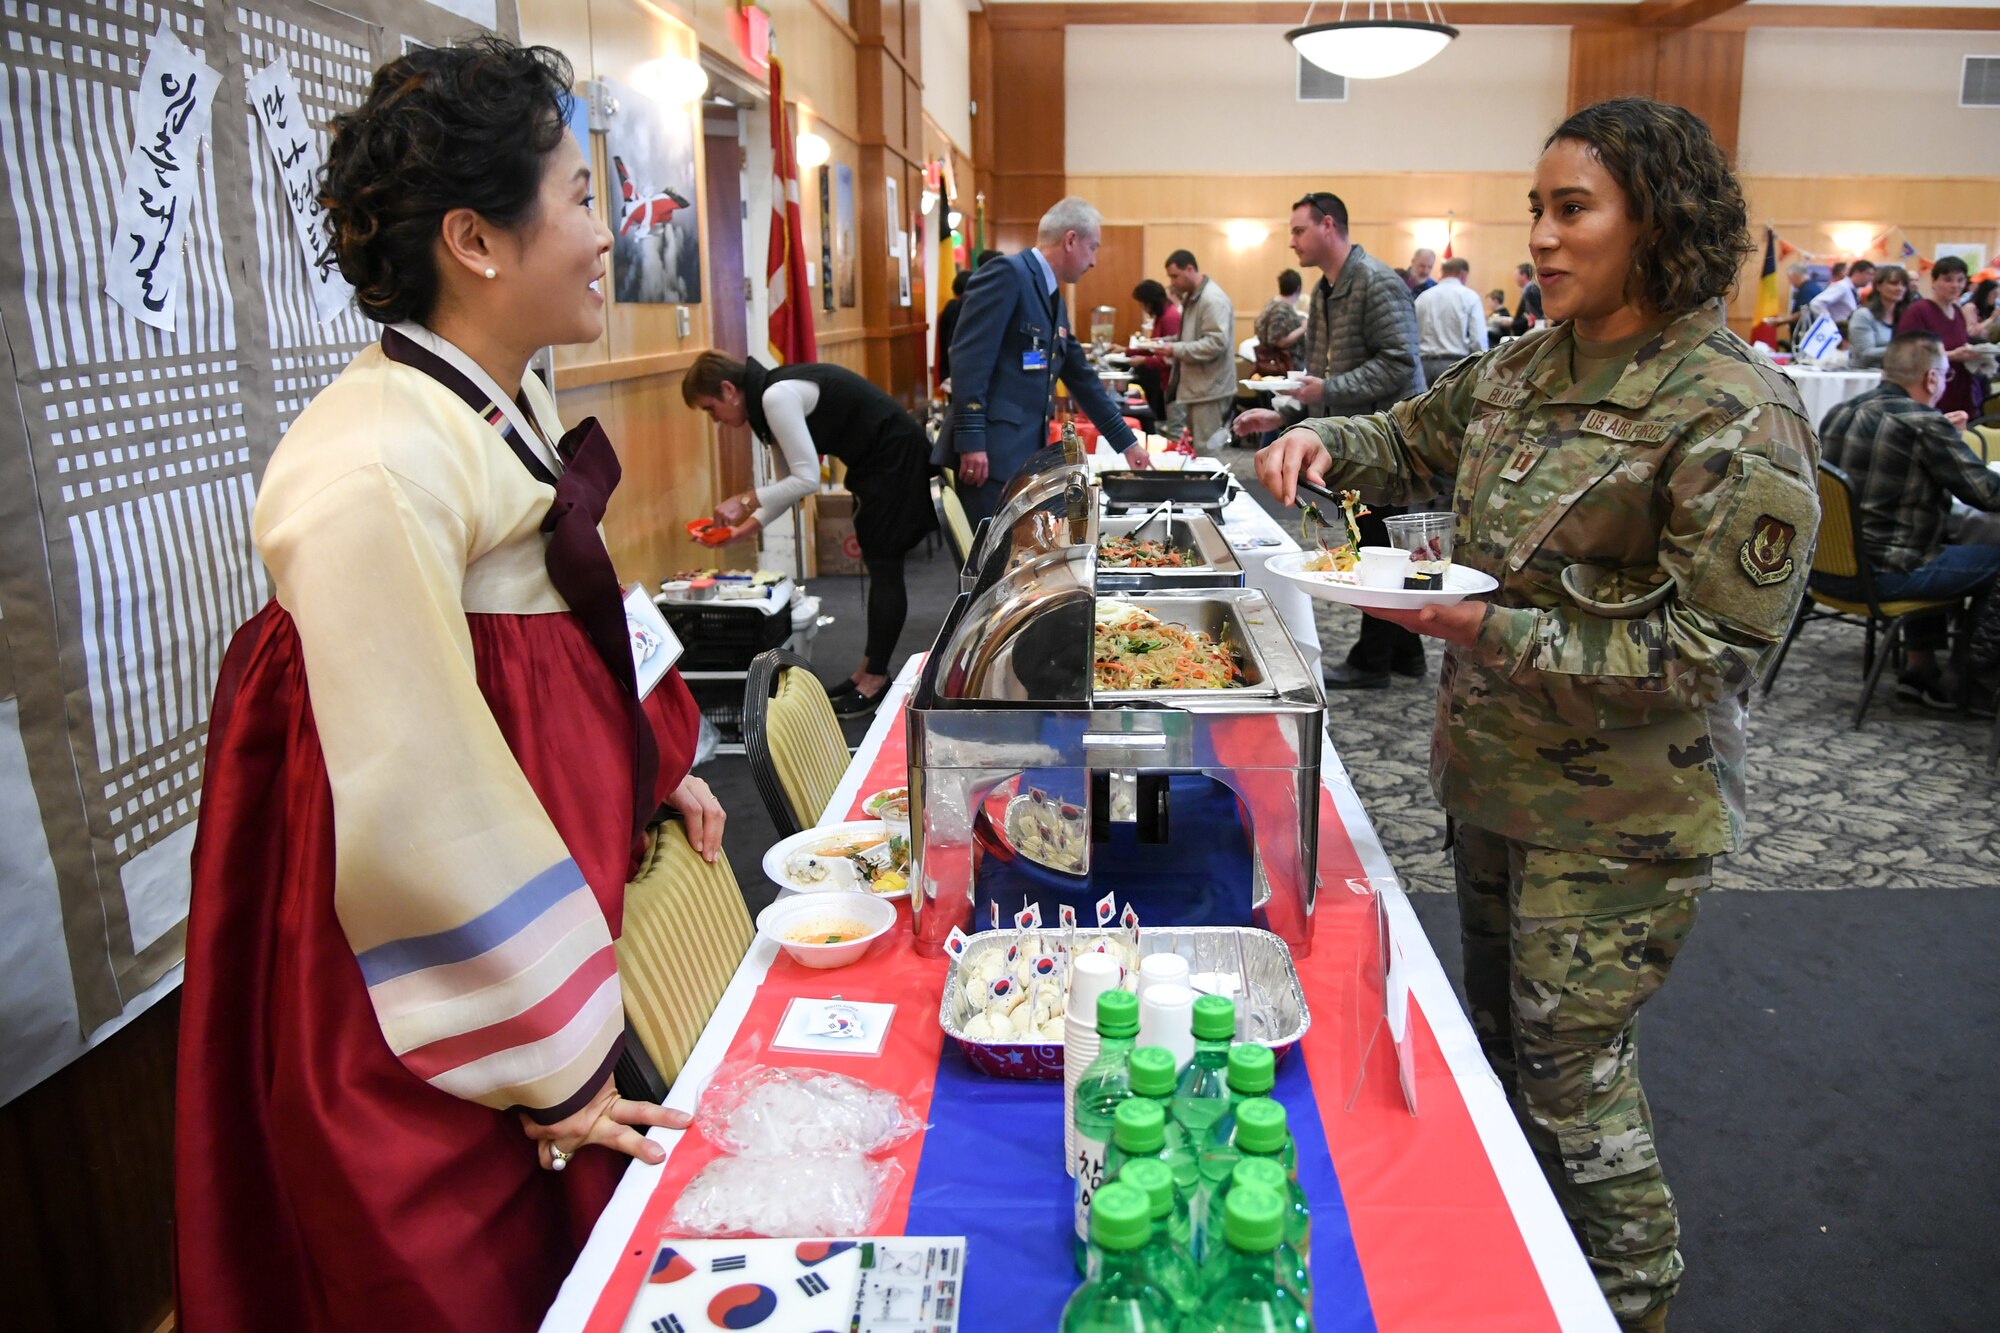 Capt. Indigo Blakely, Air Force Life Cycle Management Center, talks about Korean food with Kyungmin Lee at the International Culinary Tasting Buffet March 4, 2020, at Hill Air Force Base, Utah. The event was hosted by the Hill AFB foreign liaison officers and featured food, drinks, and cultural education from 15 different countries. (U.S. Air Force photo by Cynthia Griggs)